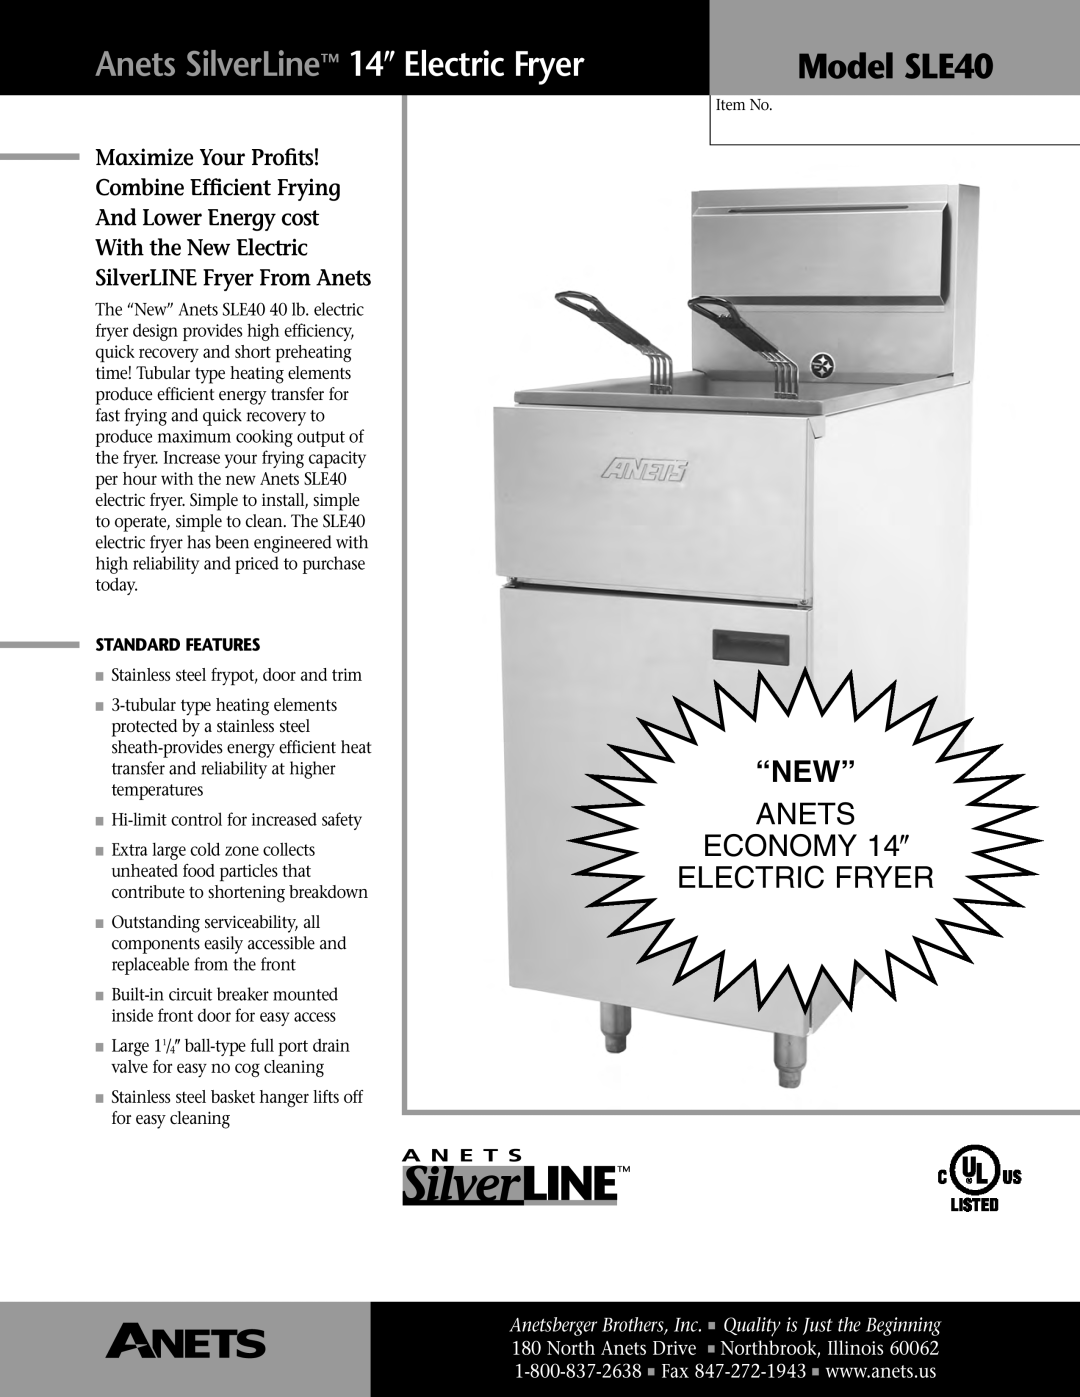 Anetsberger Brothers manual Standard Features, Electric Fryer, Anets SilverLine 14″, Model SLE40, “New”, ECONOMY 14″ 